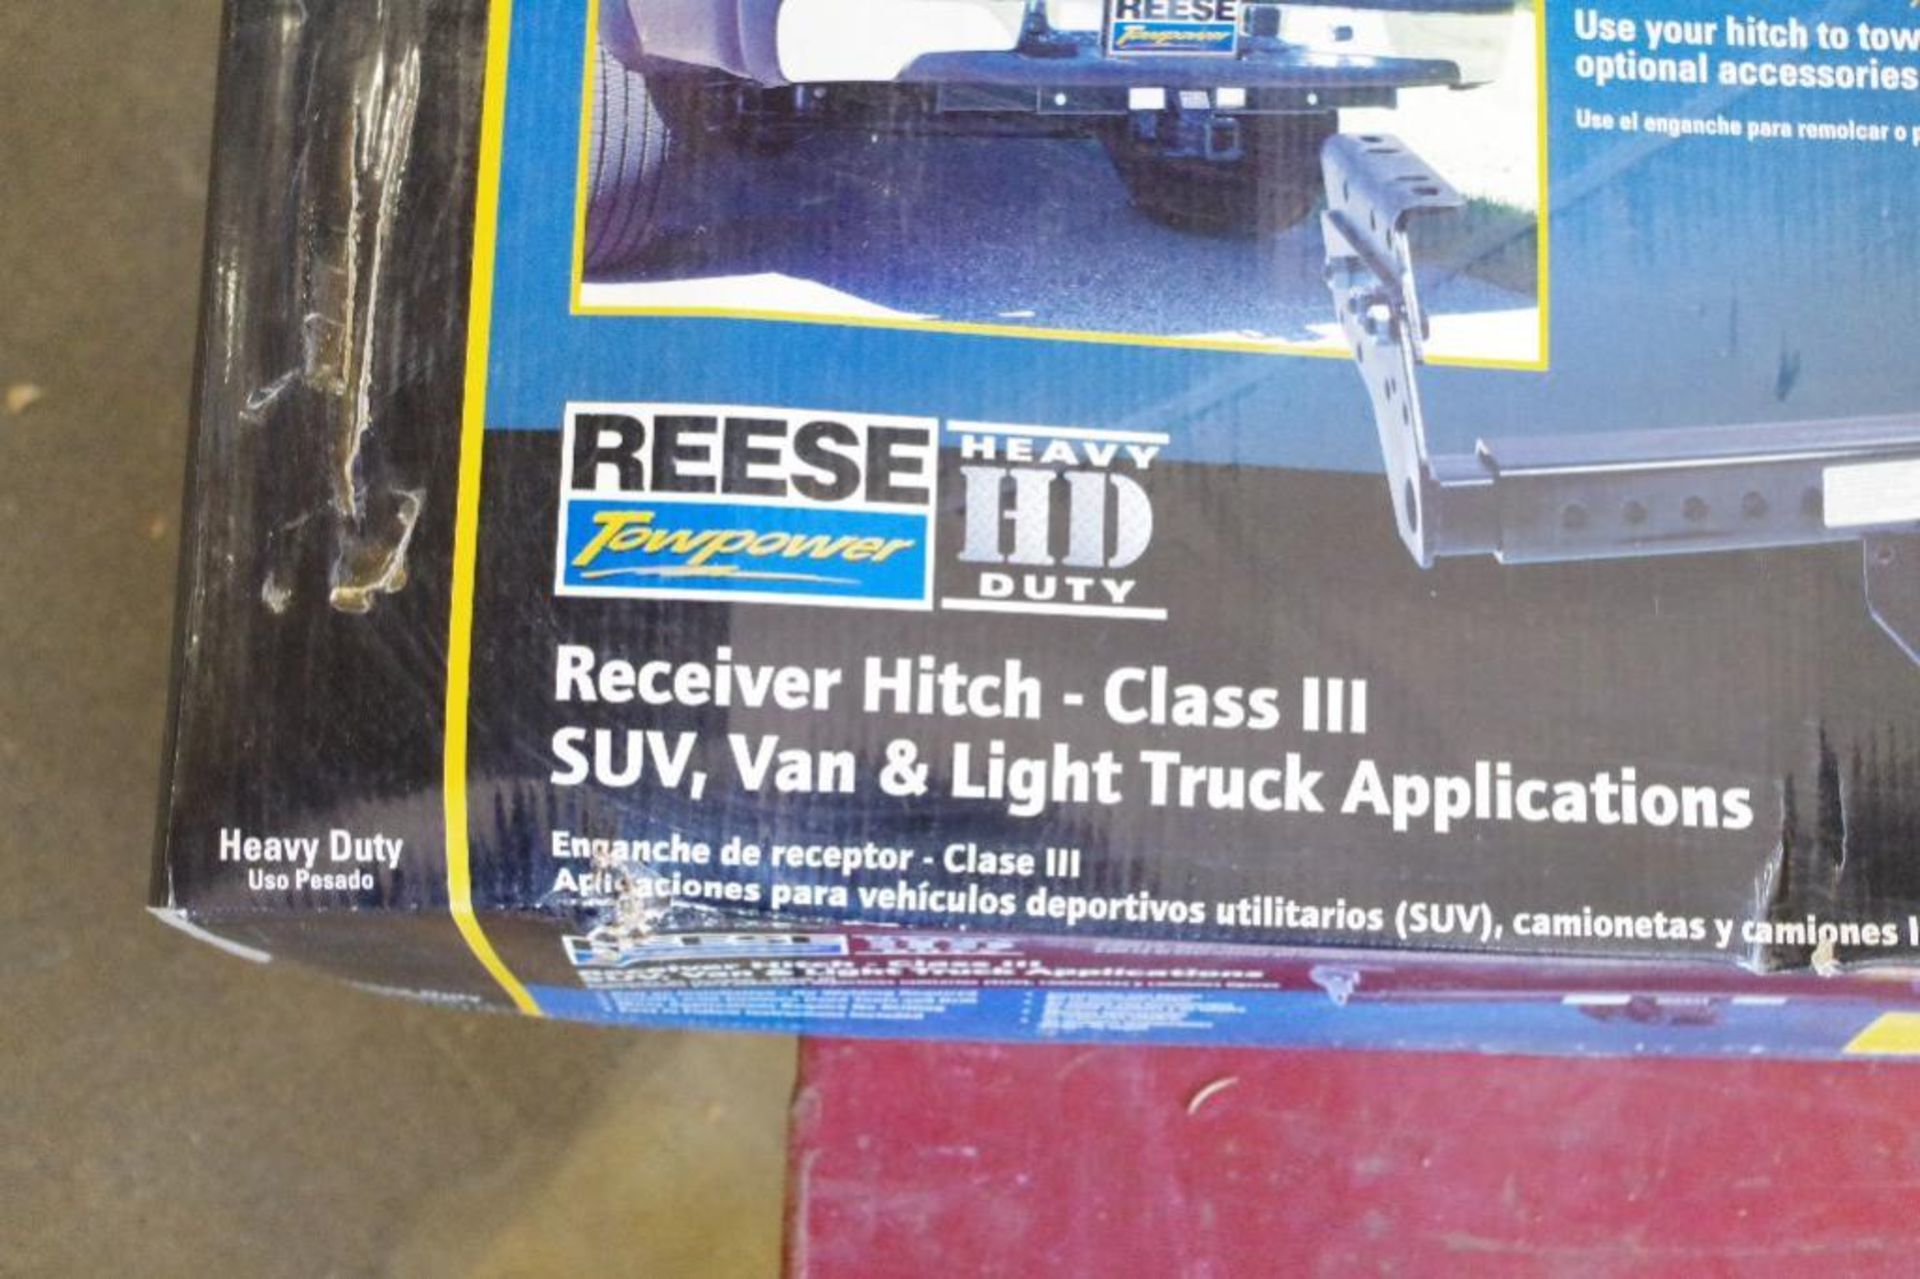 REESE Heavy Duty Receiver Hitch - Class III w/ 2" Opening, M/N 37042HD - Image 4 of 6